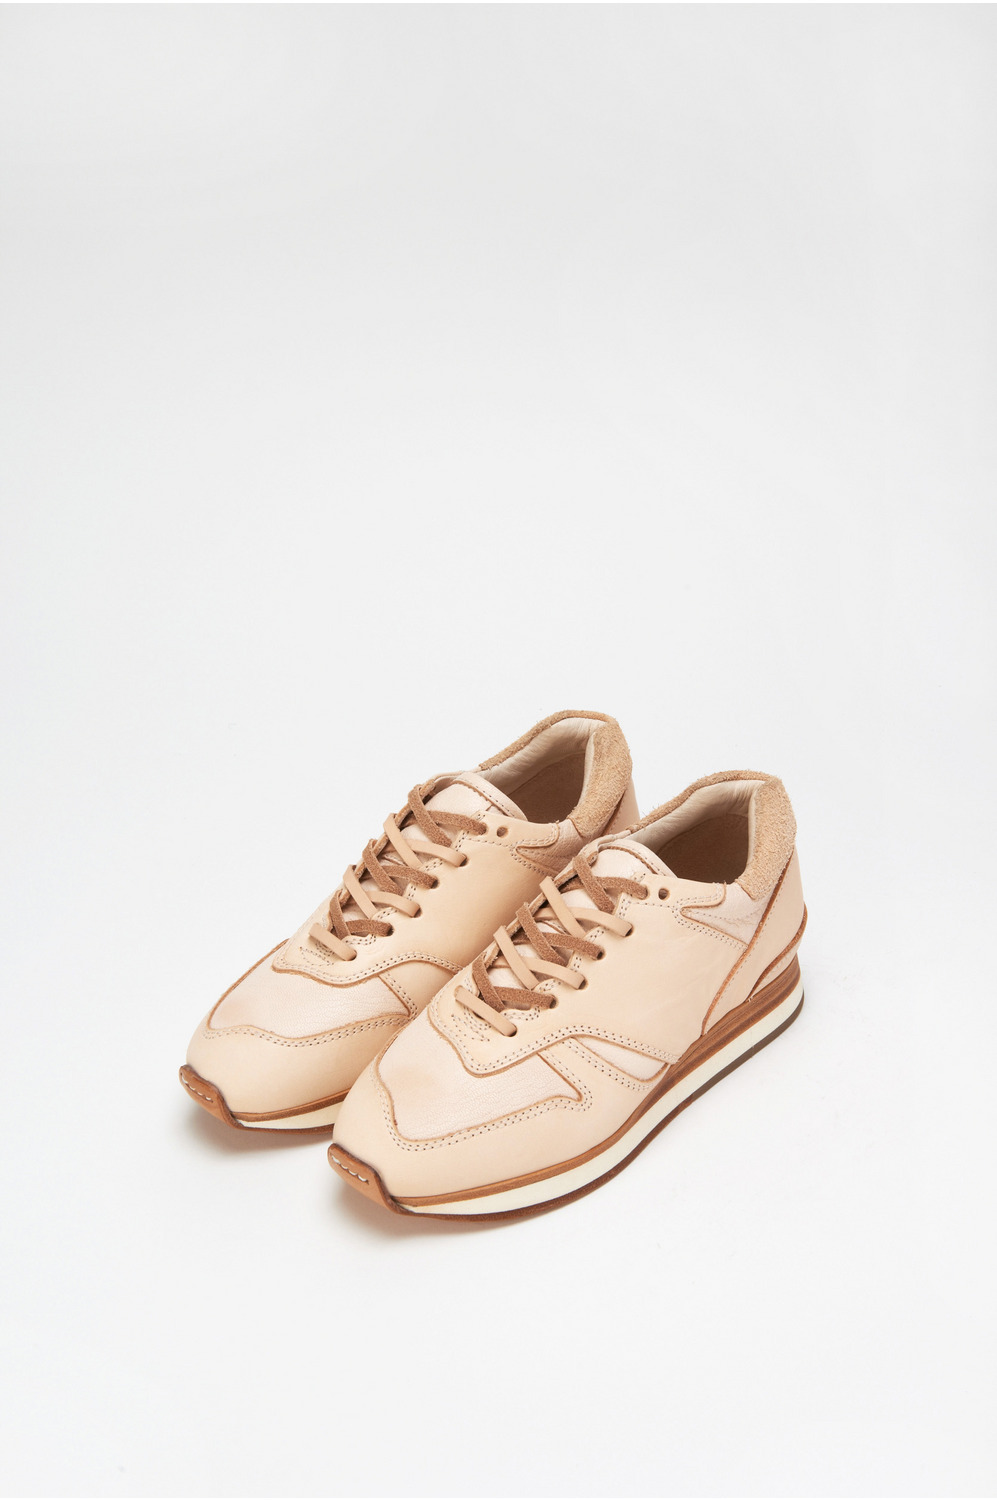 manual industrial products 08｜スキマ Hender Scheme Official Online Shop